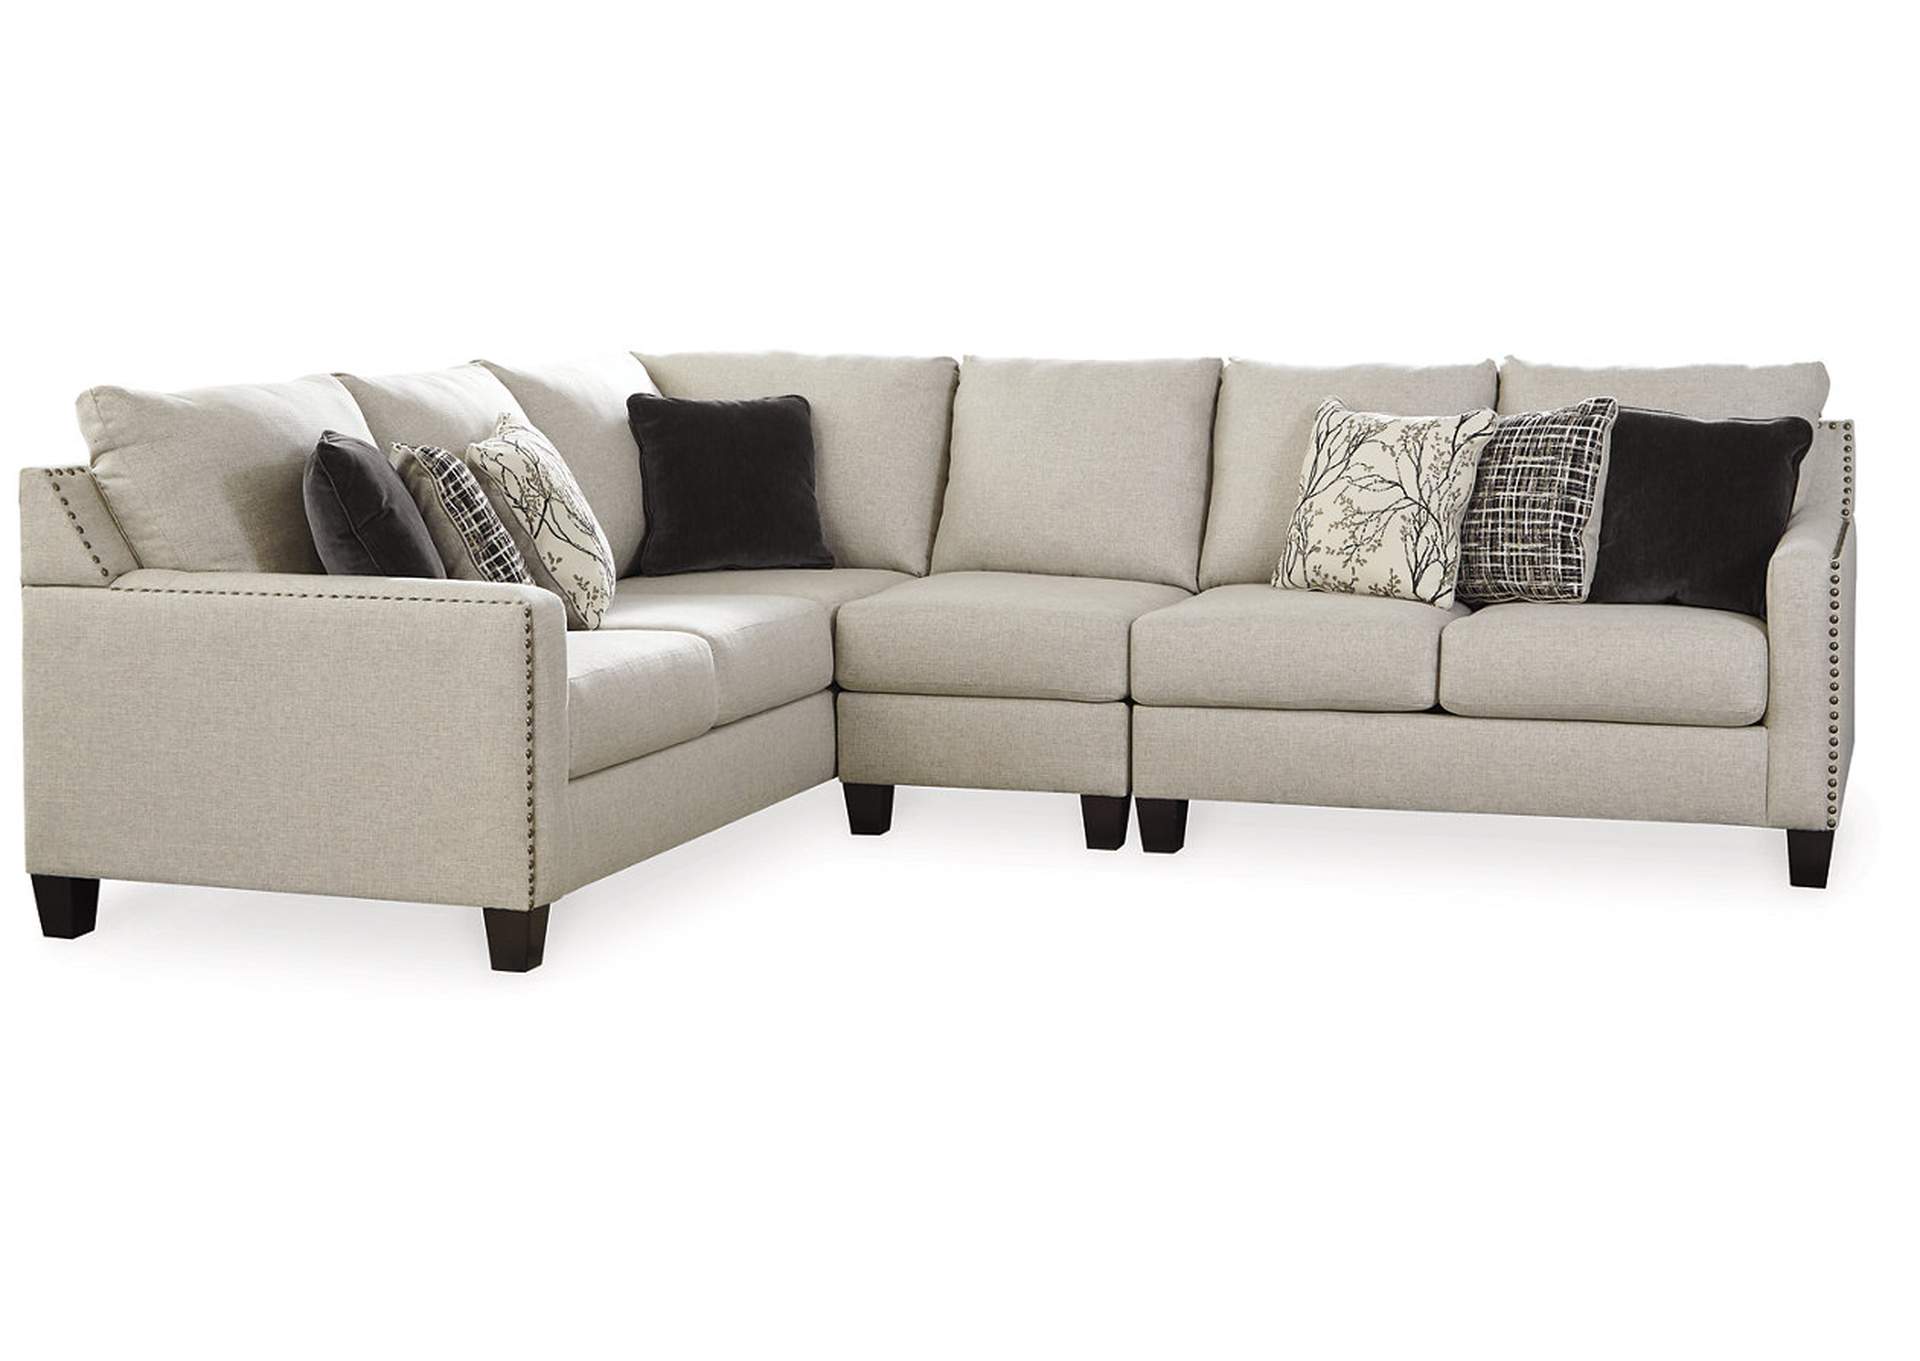 Hallenberg 3-Piece Sectional,Signature Design By Ashley